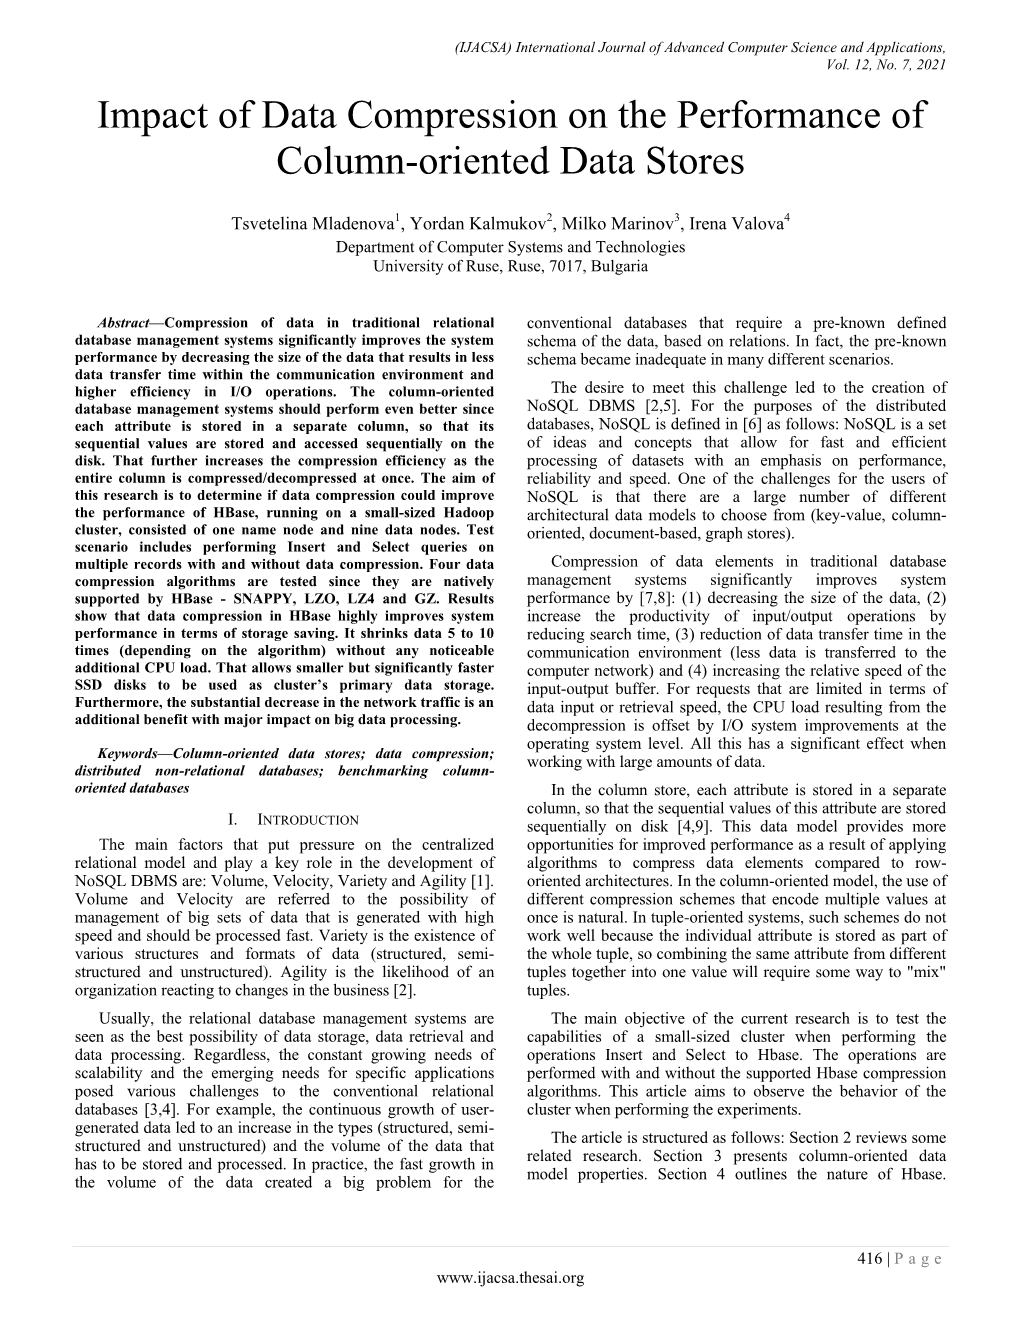 Impact of Data Compression on the Performance of Column-Oriented Data Stores